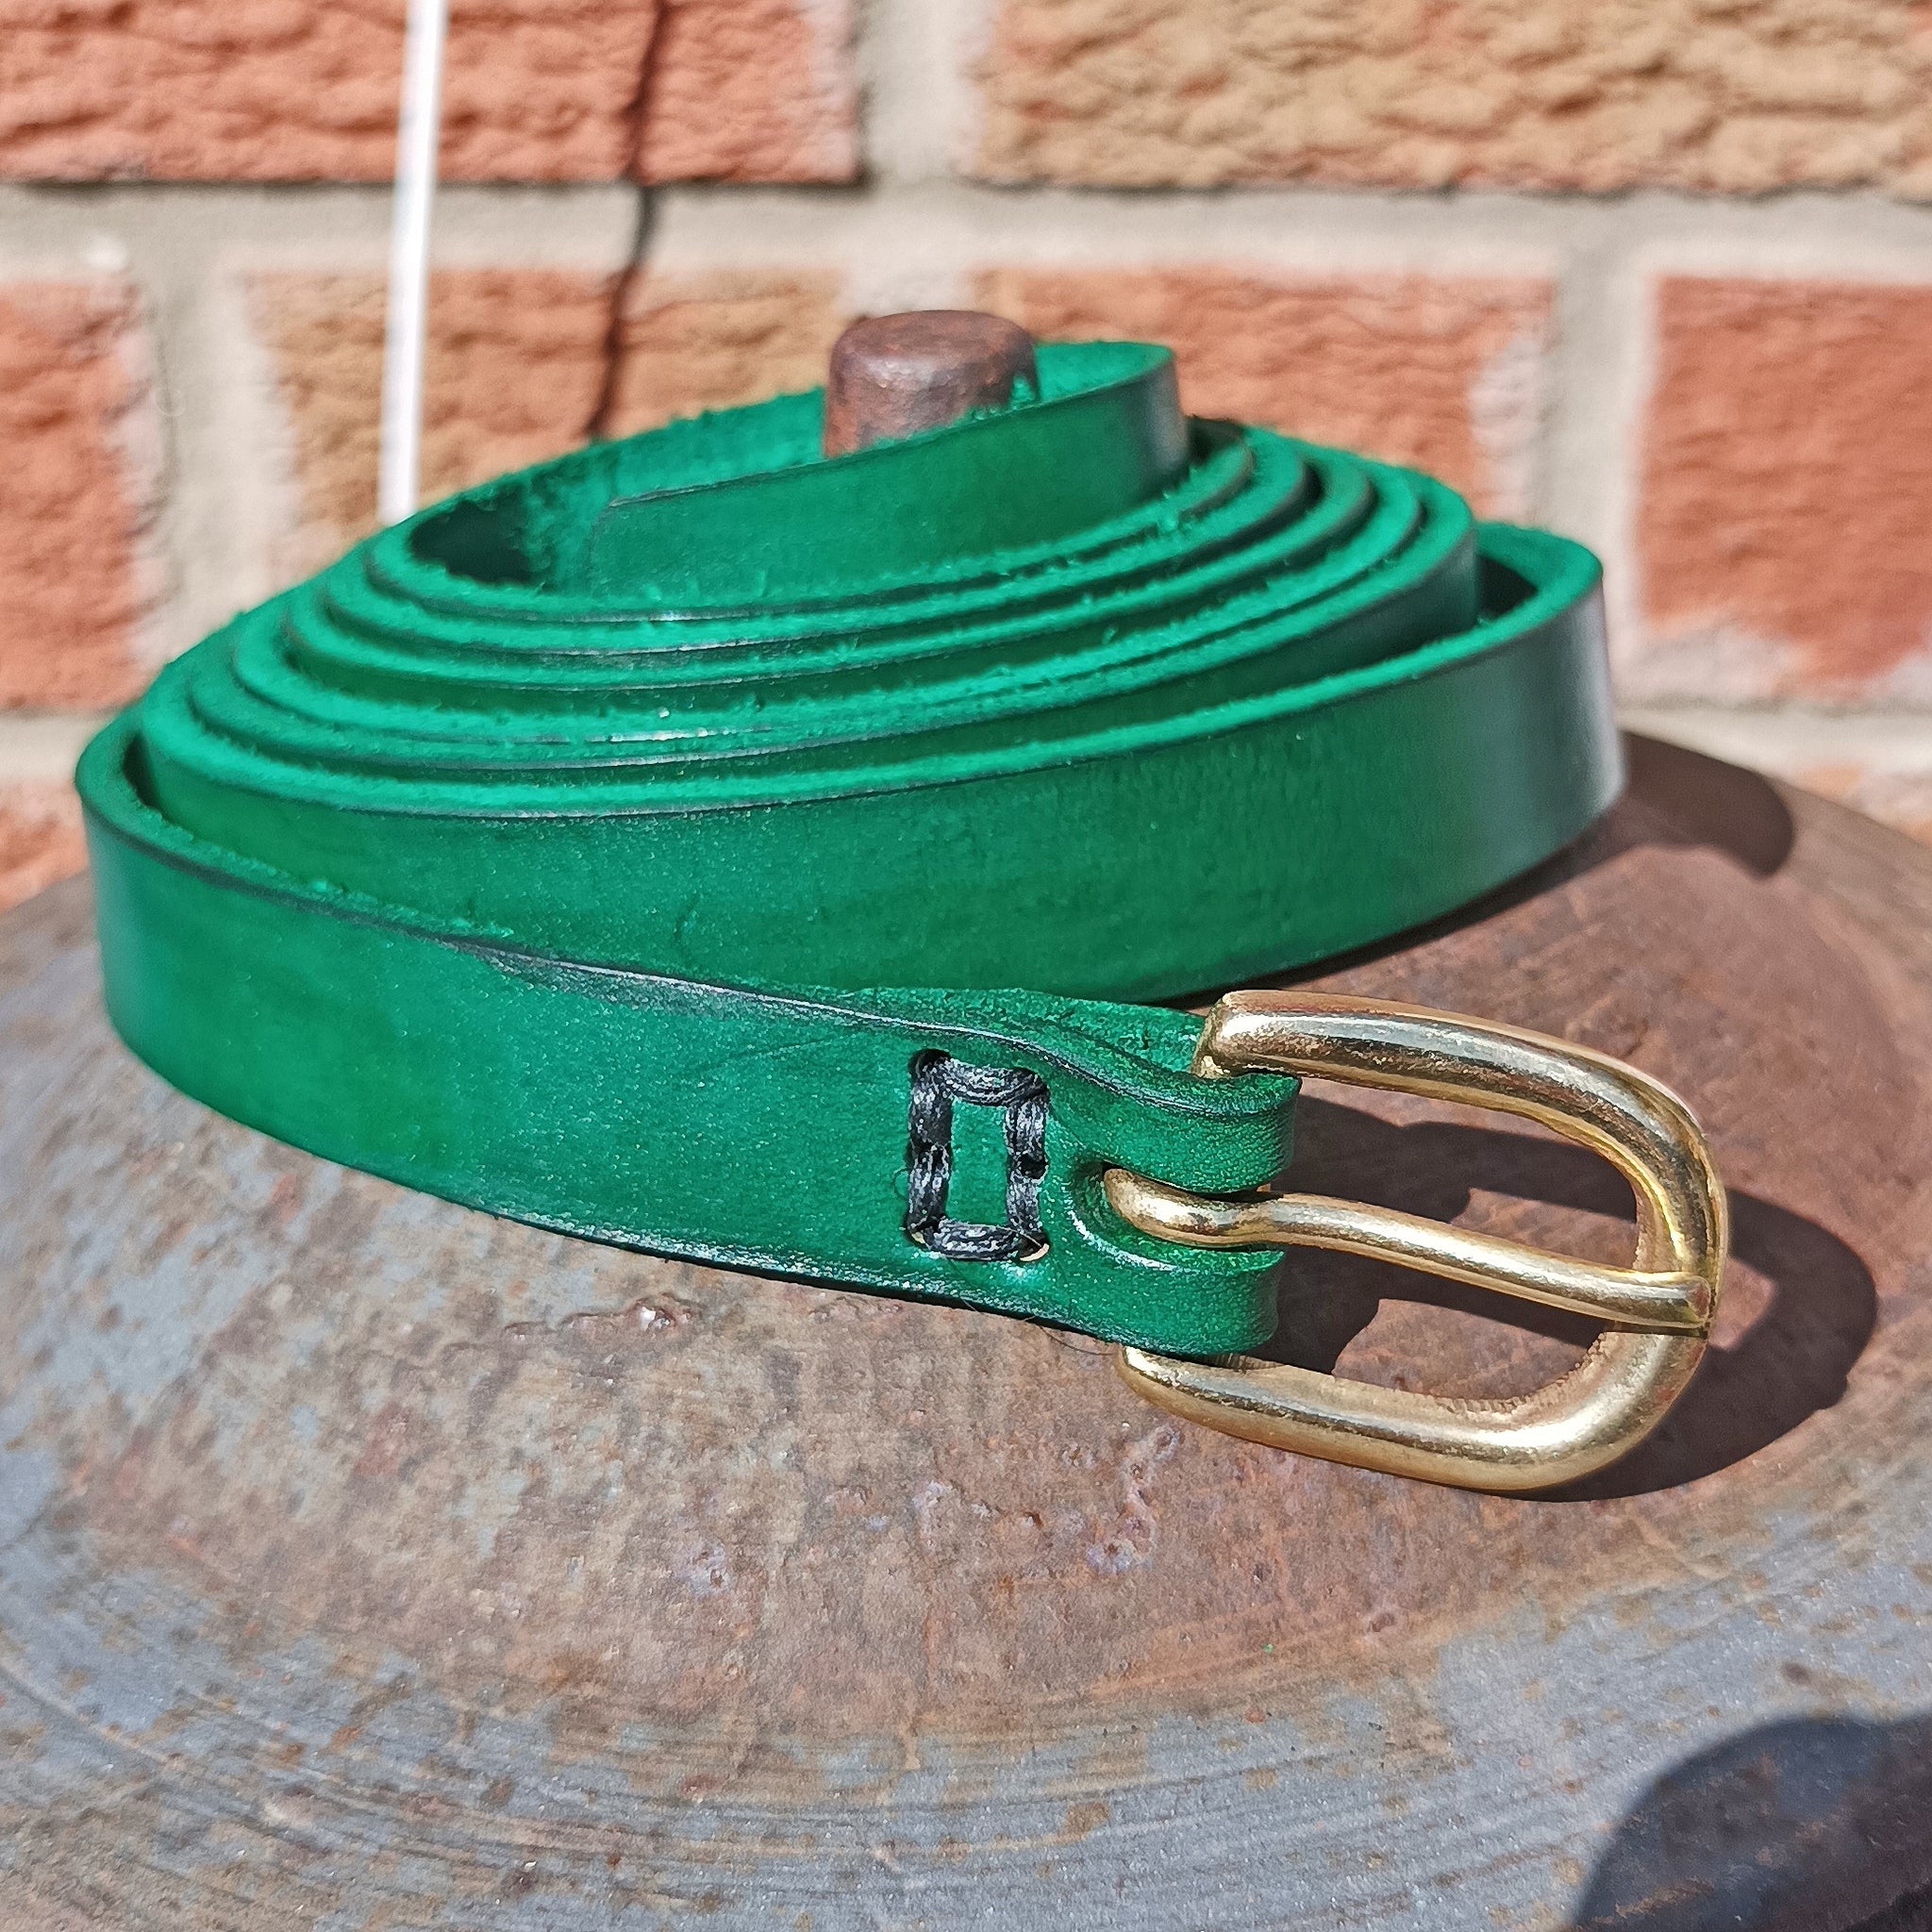 19mm Wide Green Leather Viking Belt with Brass Buckle - Outside